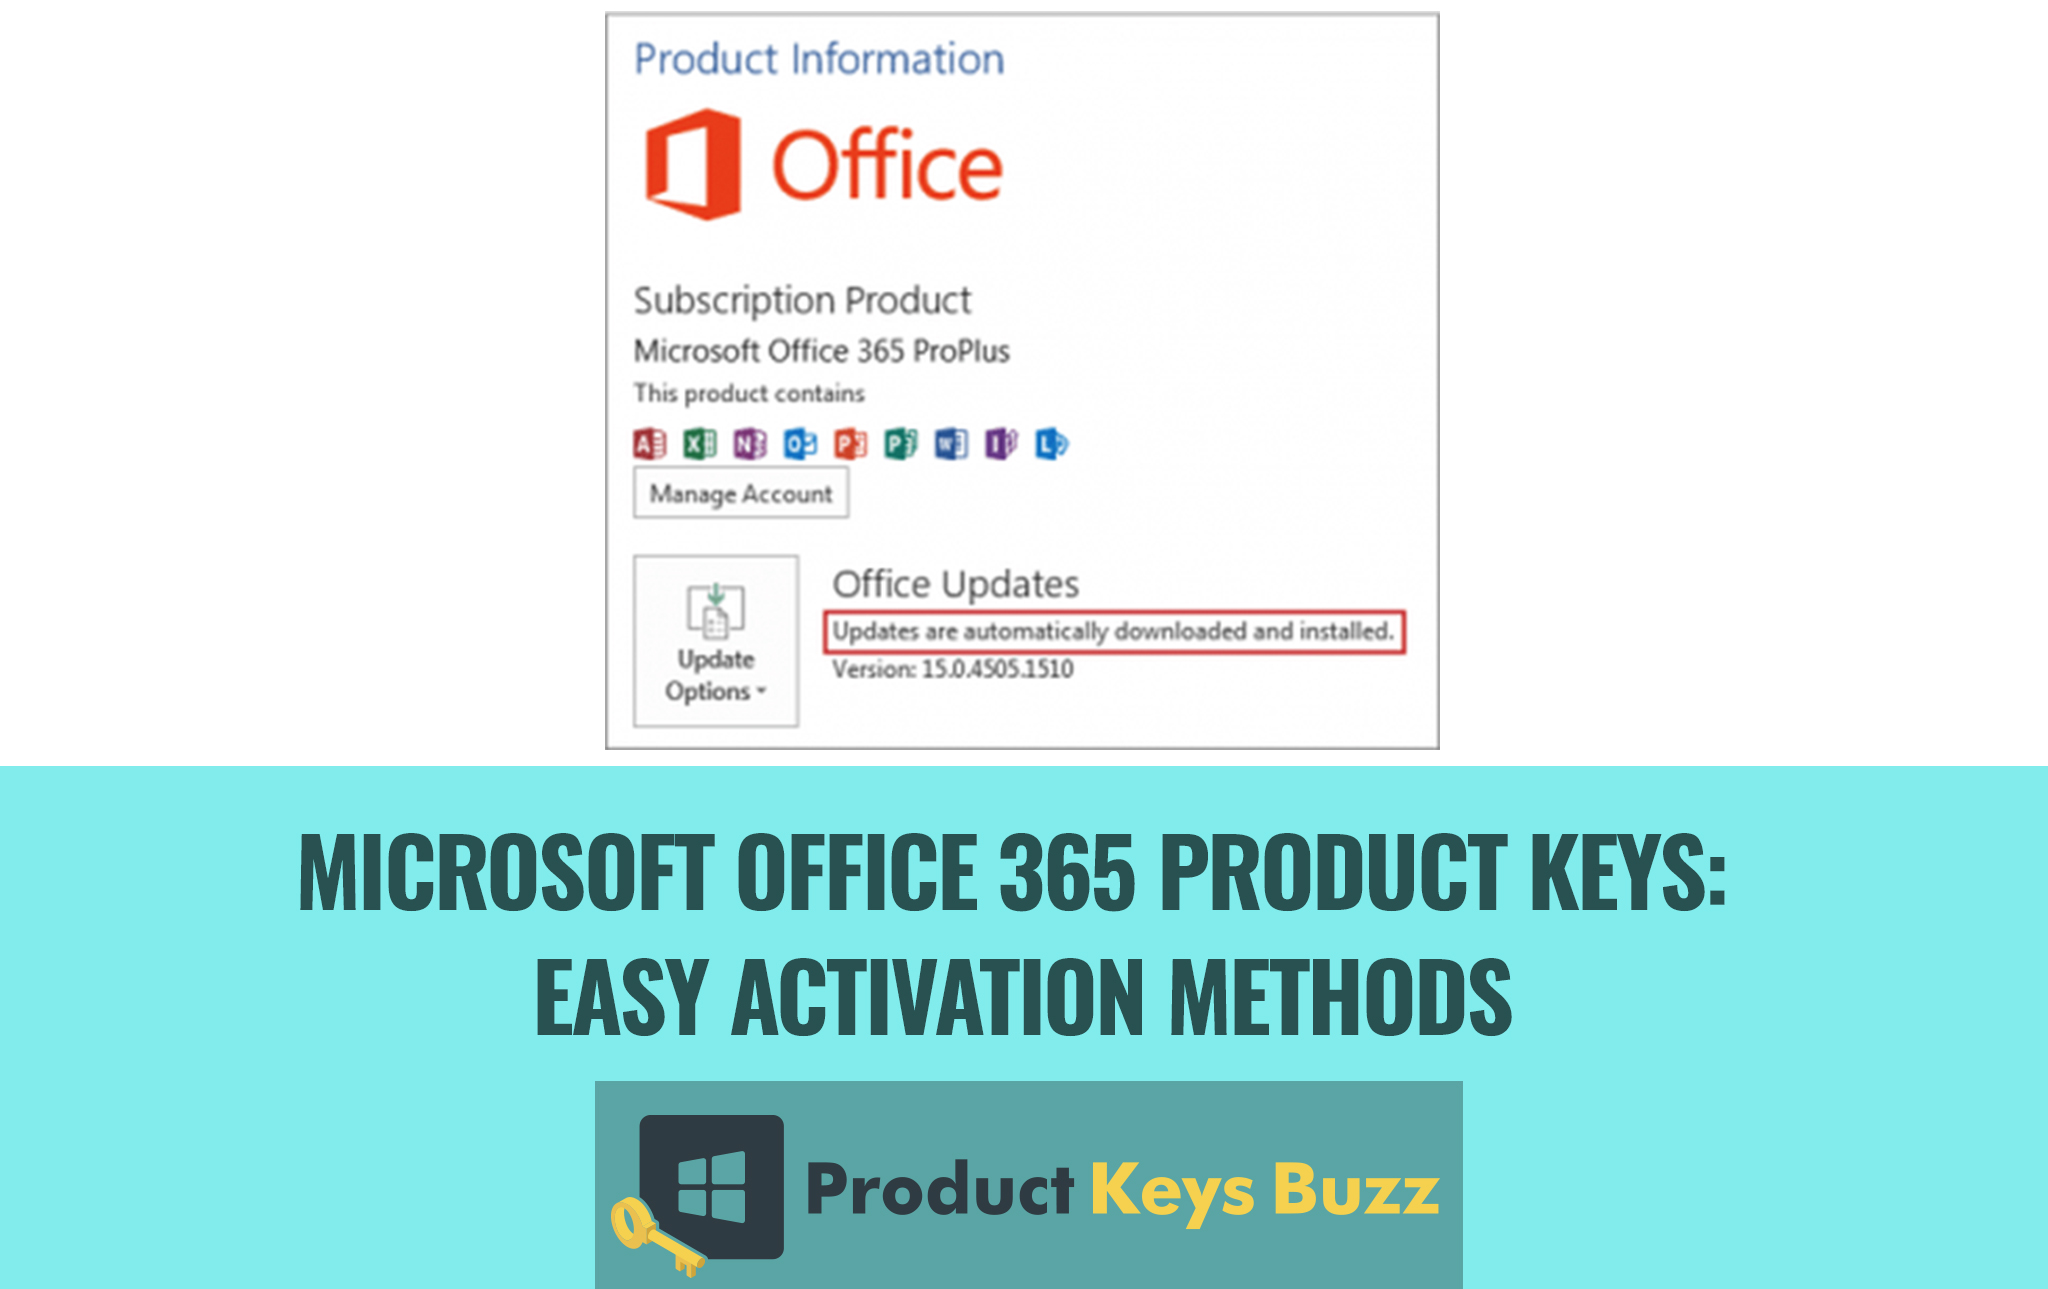 product key finder ms office 2013